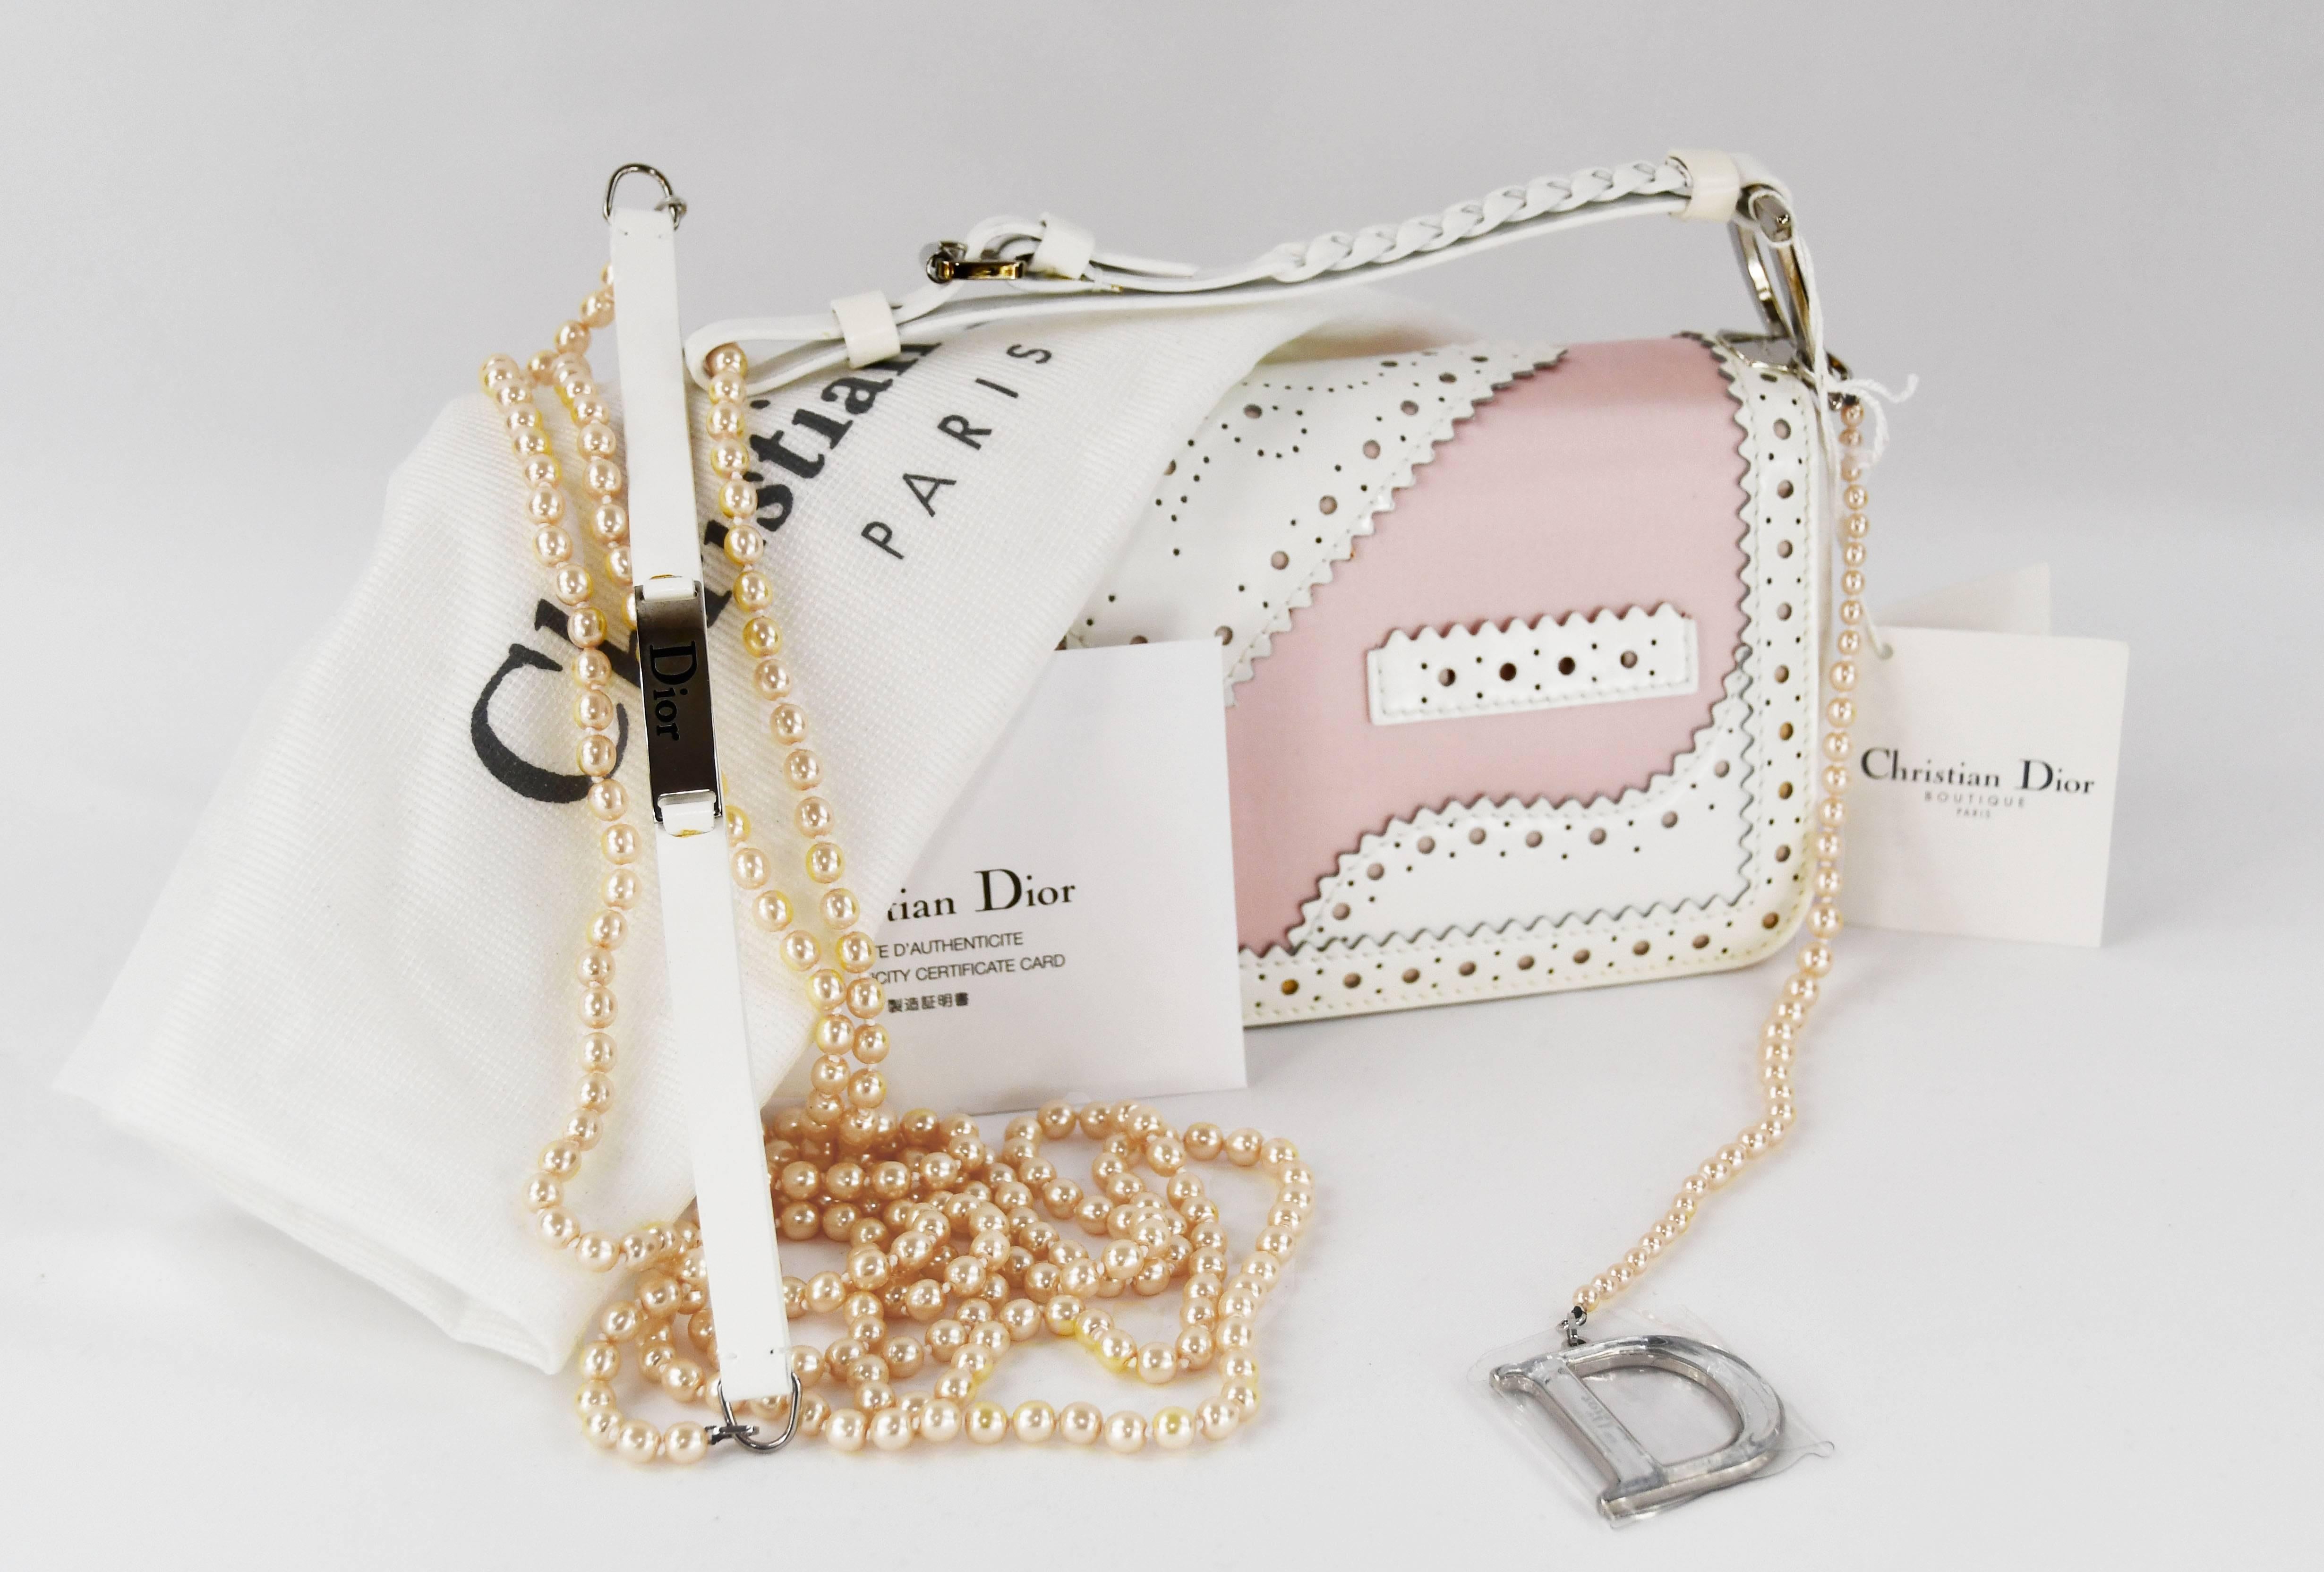 This is an exquisite Christian Dior patent D'Trick shoulder bag.  It is made out of pink and white leather that resembles the style of patent leather shoes with clutch handle with pearl necklace attached.  New with tags.  Bag measurements 8.5 inches